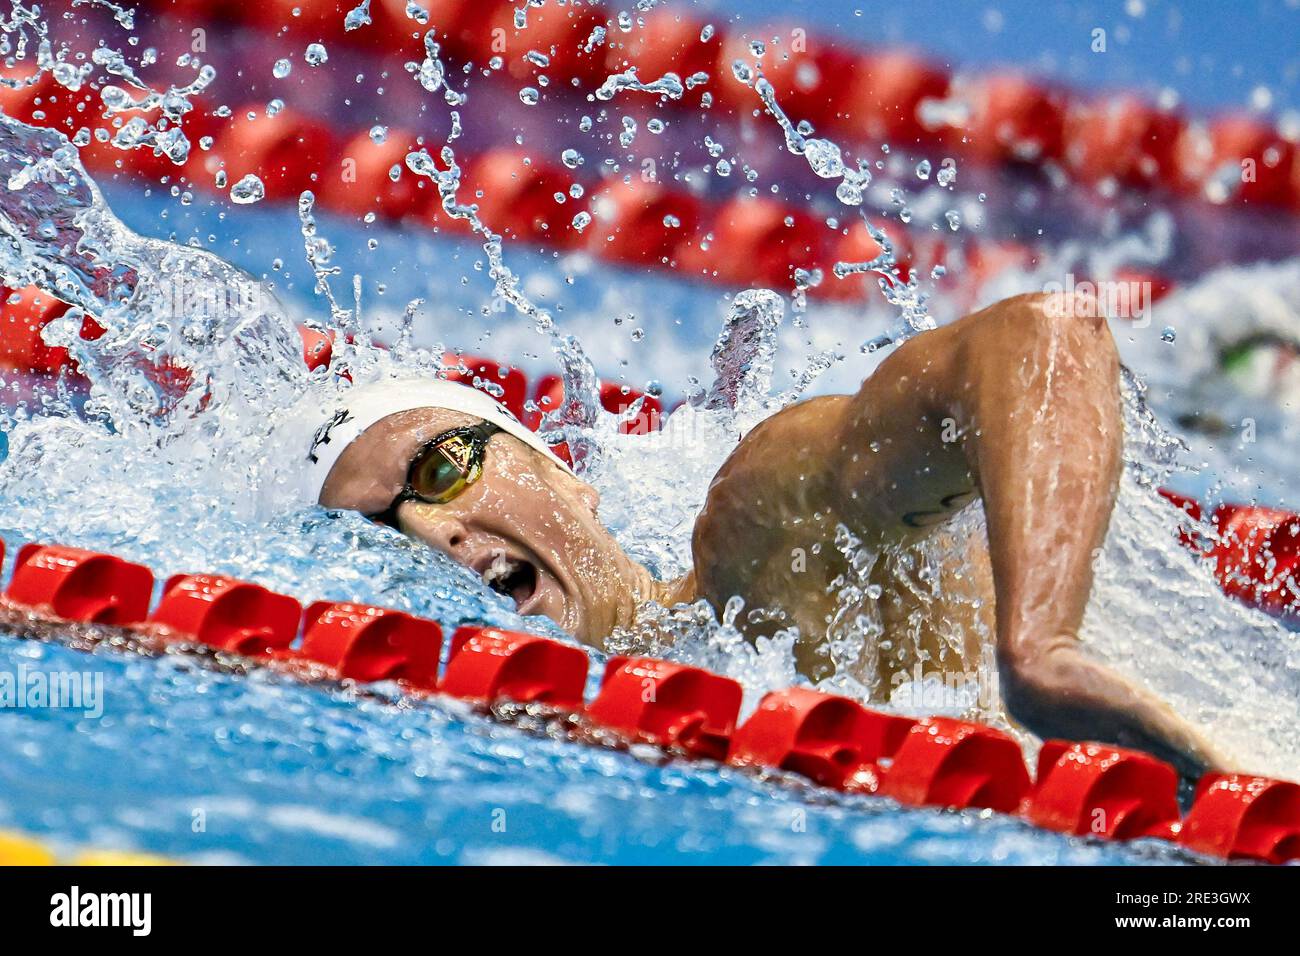 Fukuoka, Japan. 25th July, 2023. Damien Joly of France competes in the Men's Freestyle 1500m Heats during the 20th World Aquatics Championships at the Marine Messe Hall A in Fukuoka (Japan), July 25th, 2023. Credit: Insidefoto di andrea staccioli/Alamy Live News Stock Photo